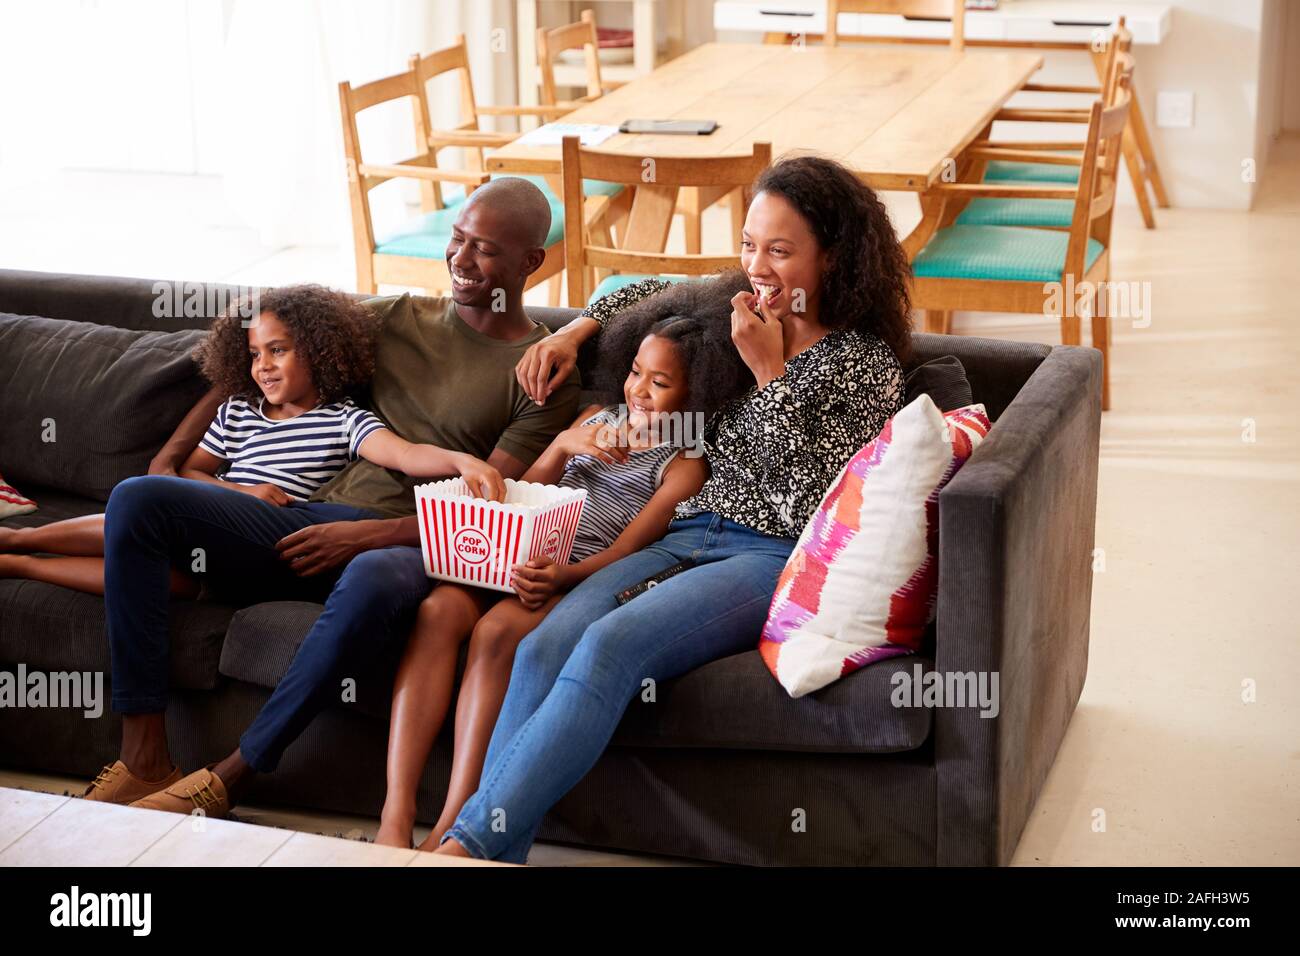 Family Sitting On Sofa At Home Eating Popcorn And Watching Movie Together Stock Photo